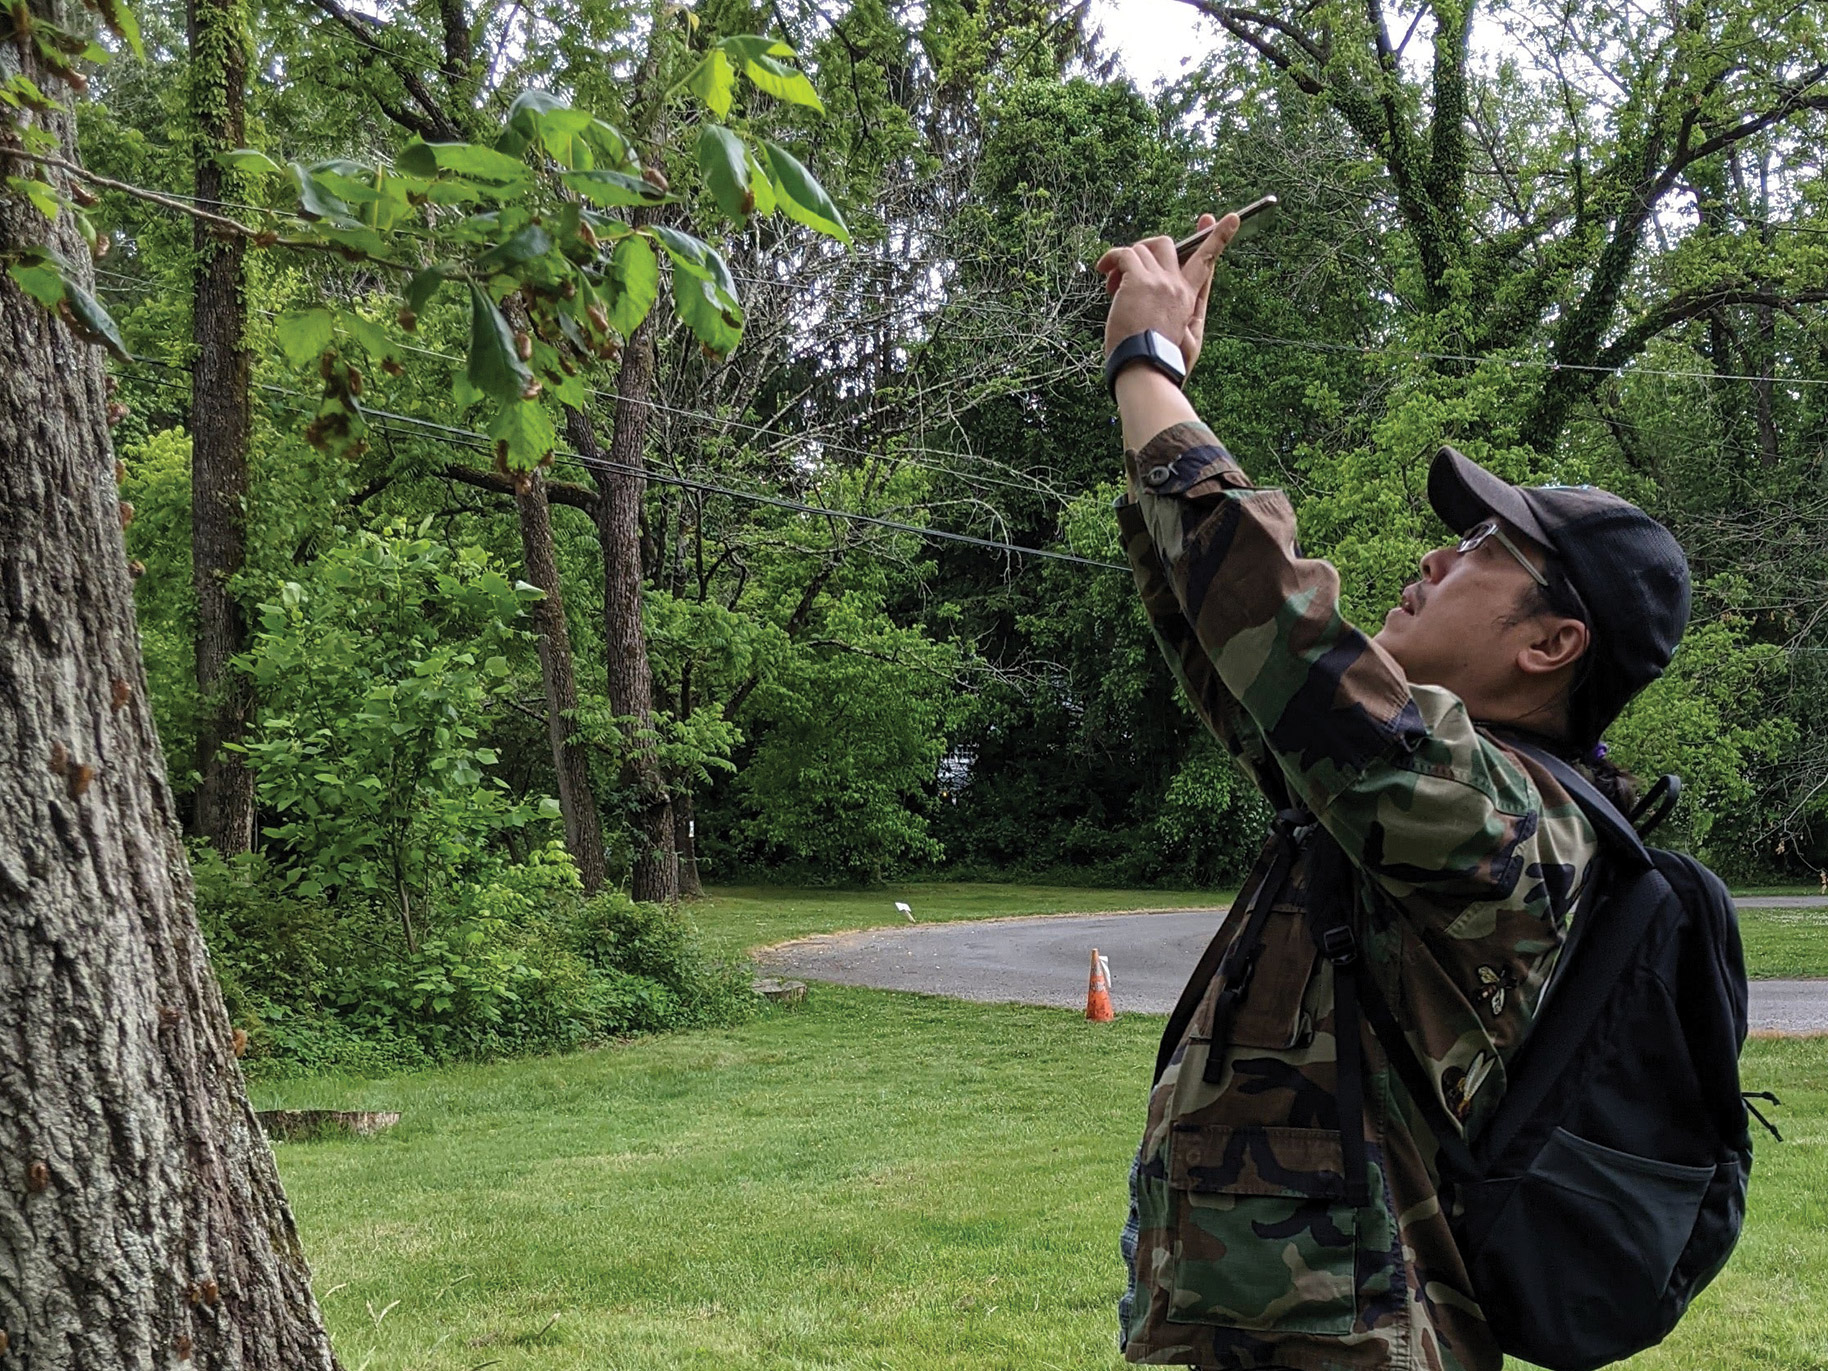 A man in a camouflage jacket and hat with arms stretched above him taking a photo of insects on a tree